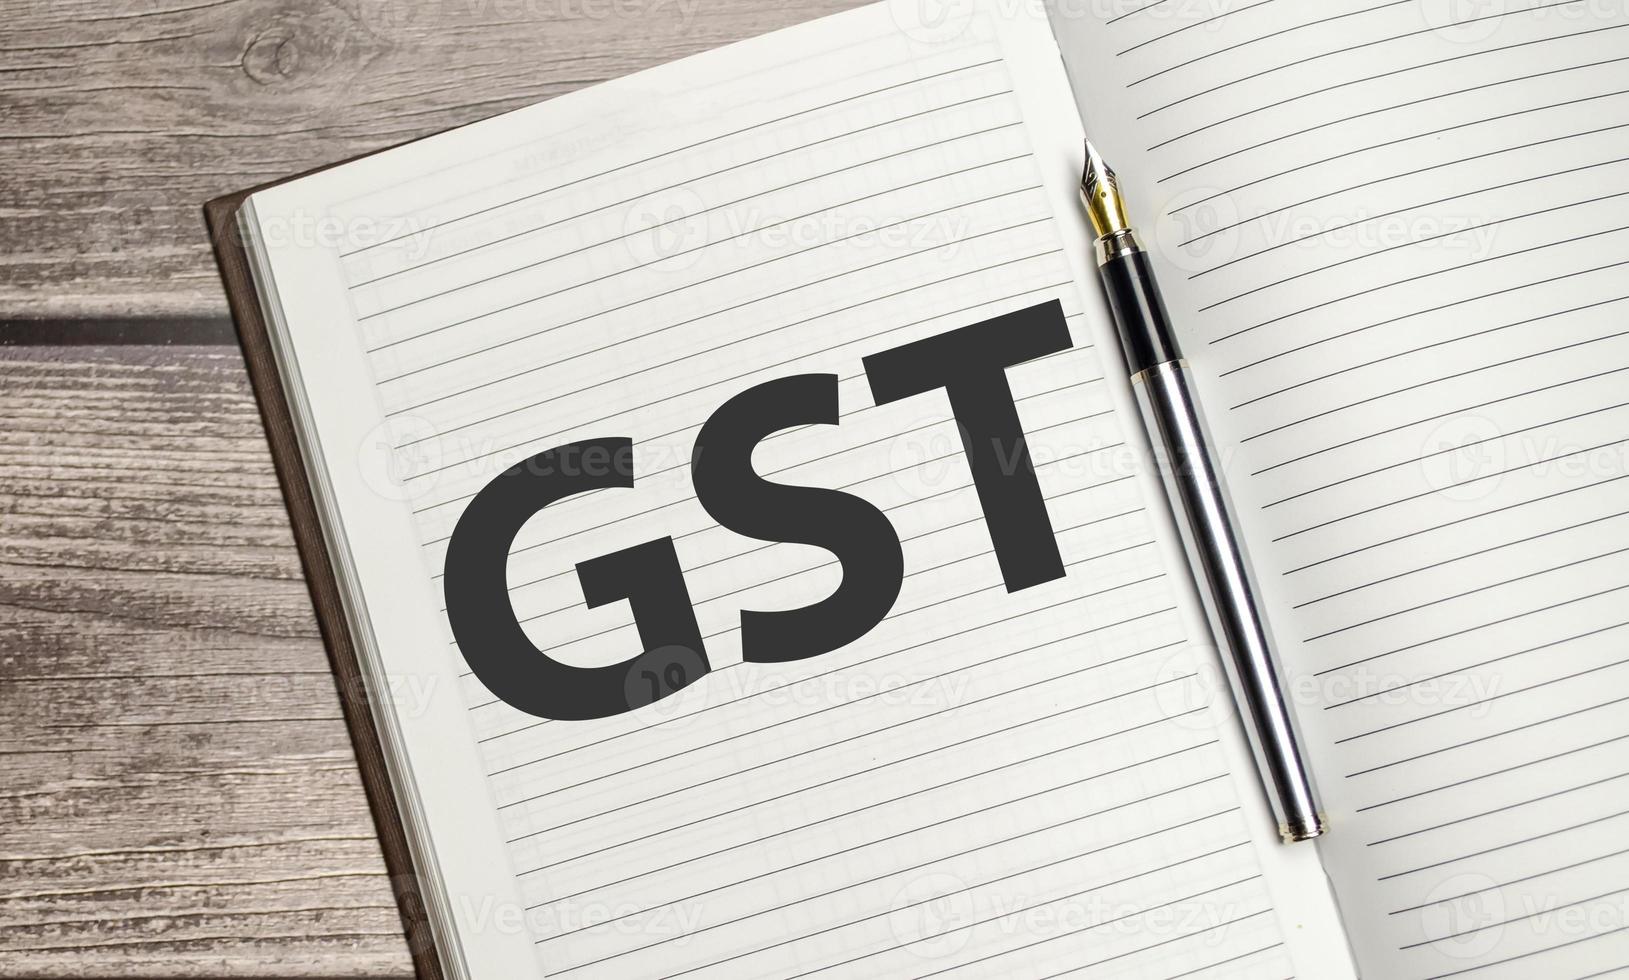 GST text on notepad with pen, business concept photo